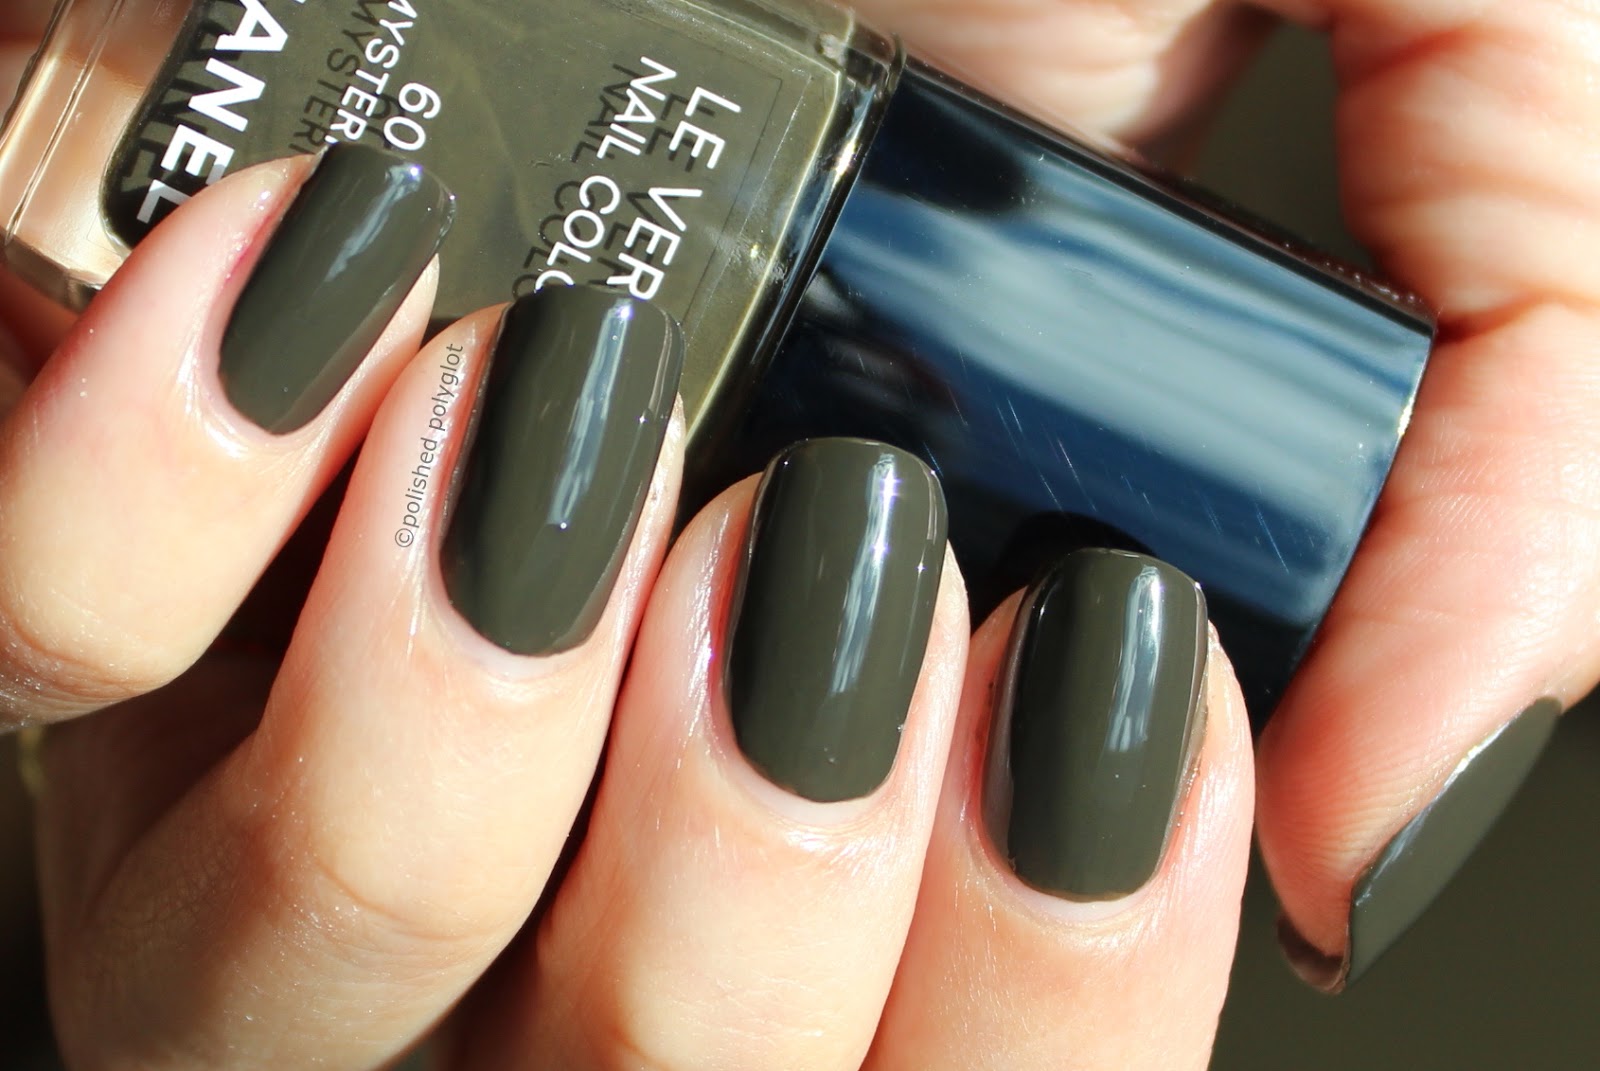 NOTD: Chanel Le Vernis 601 Mysterious Welcome to Fall! / Polished Polyglot